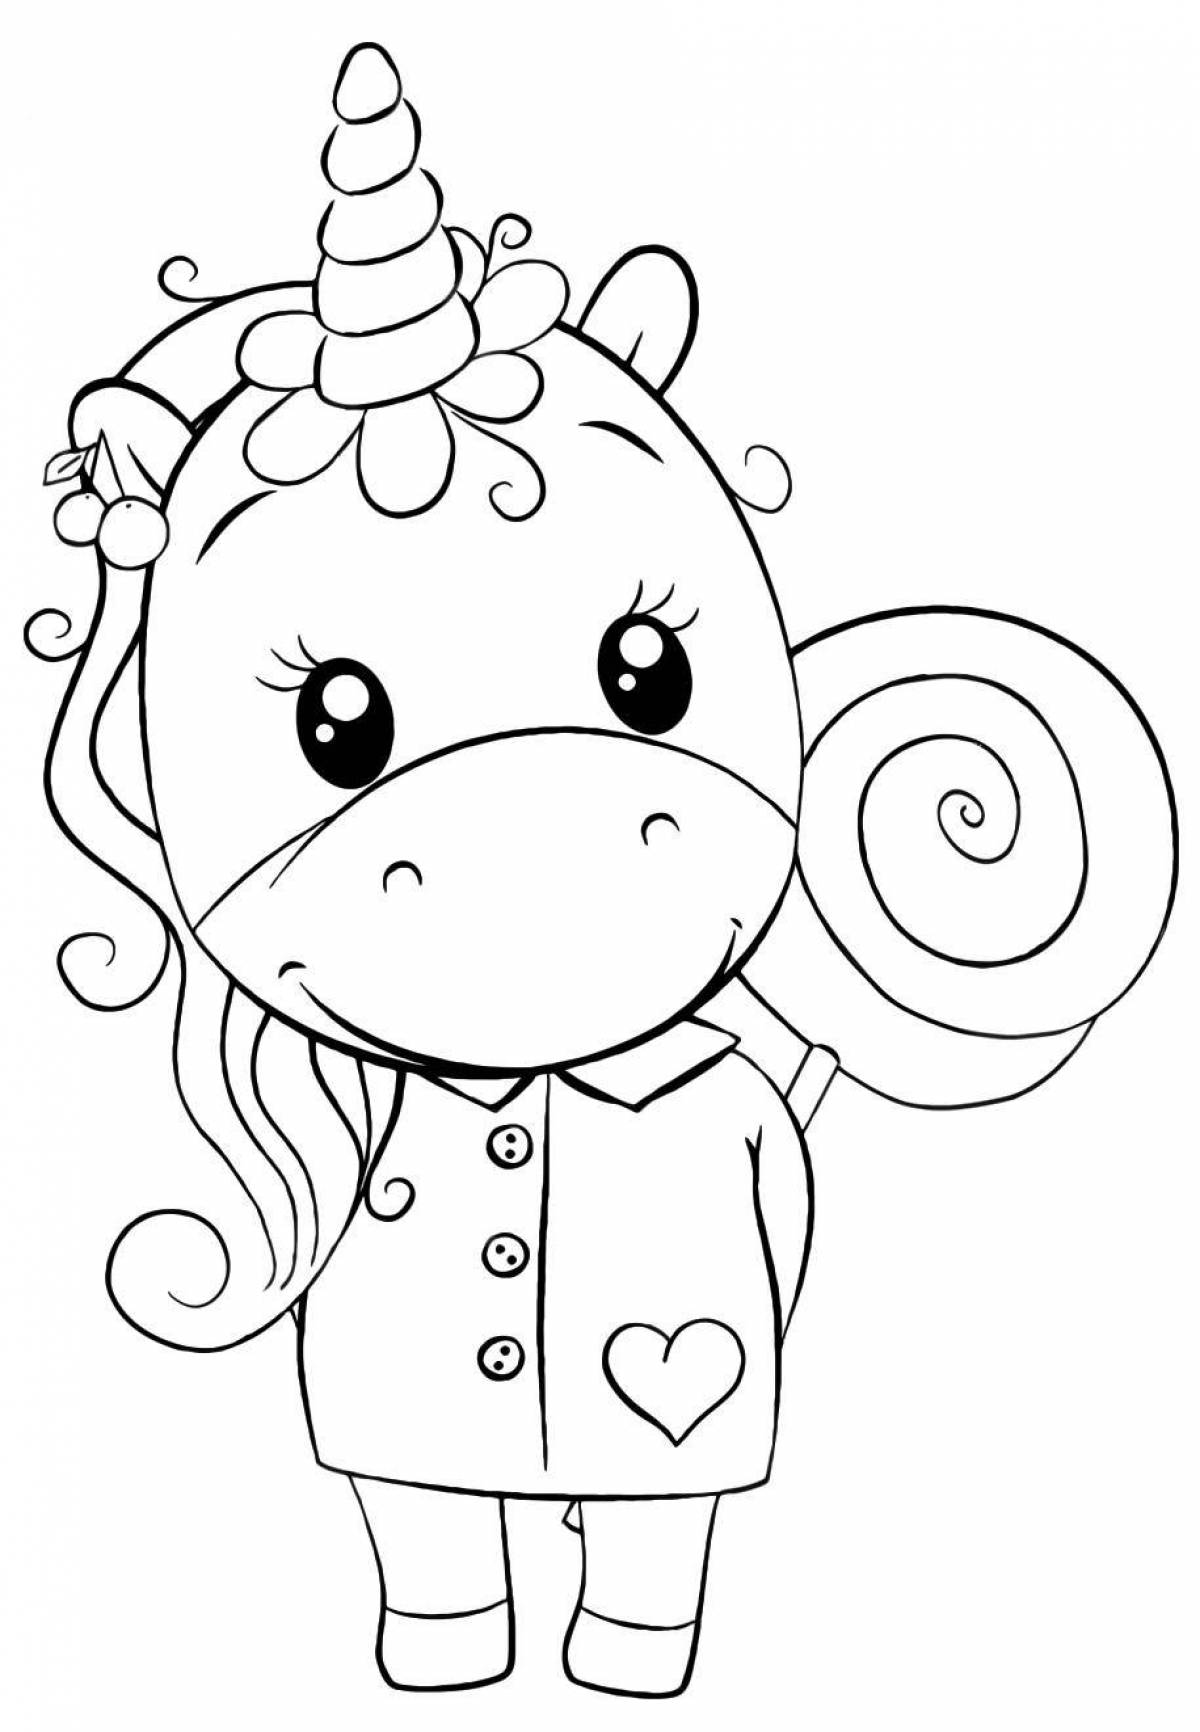 Adorable cute unicorn coloring book for kids